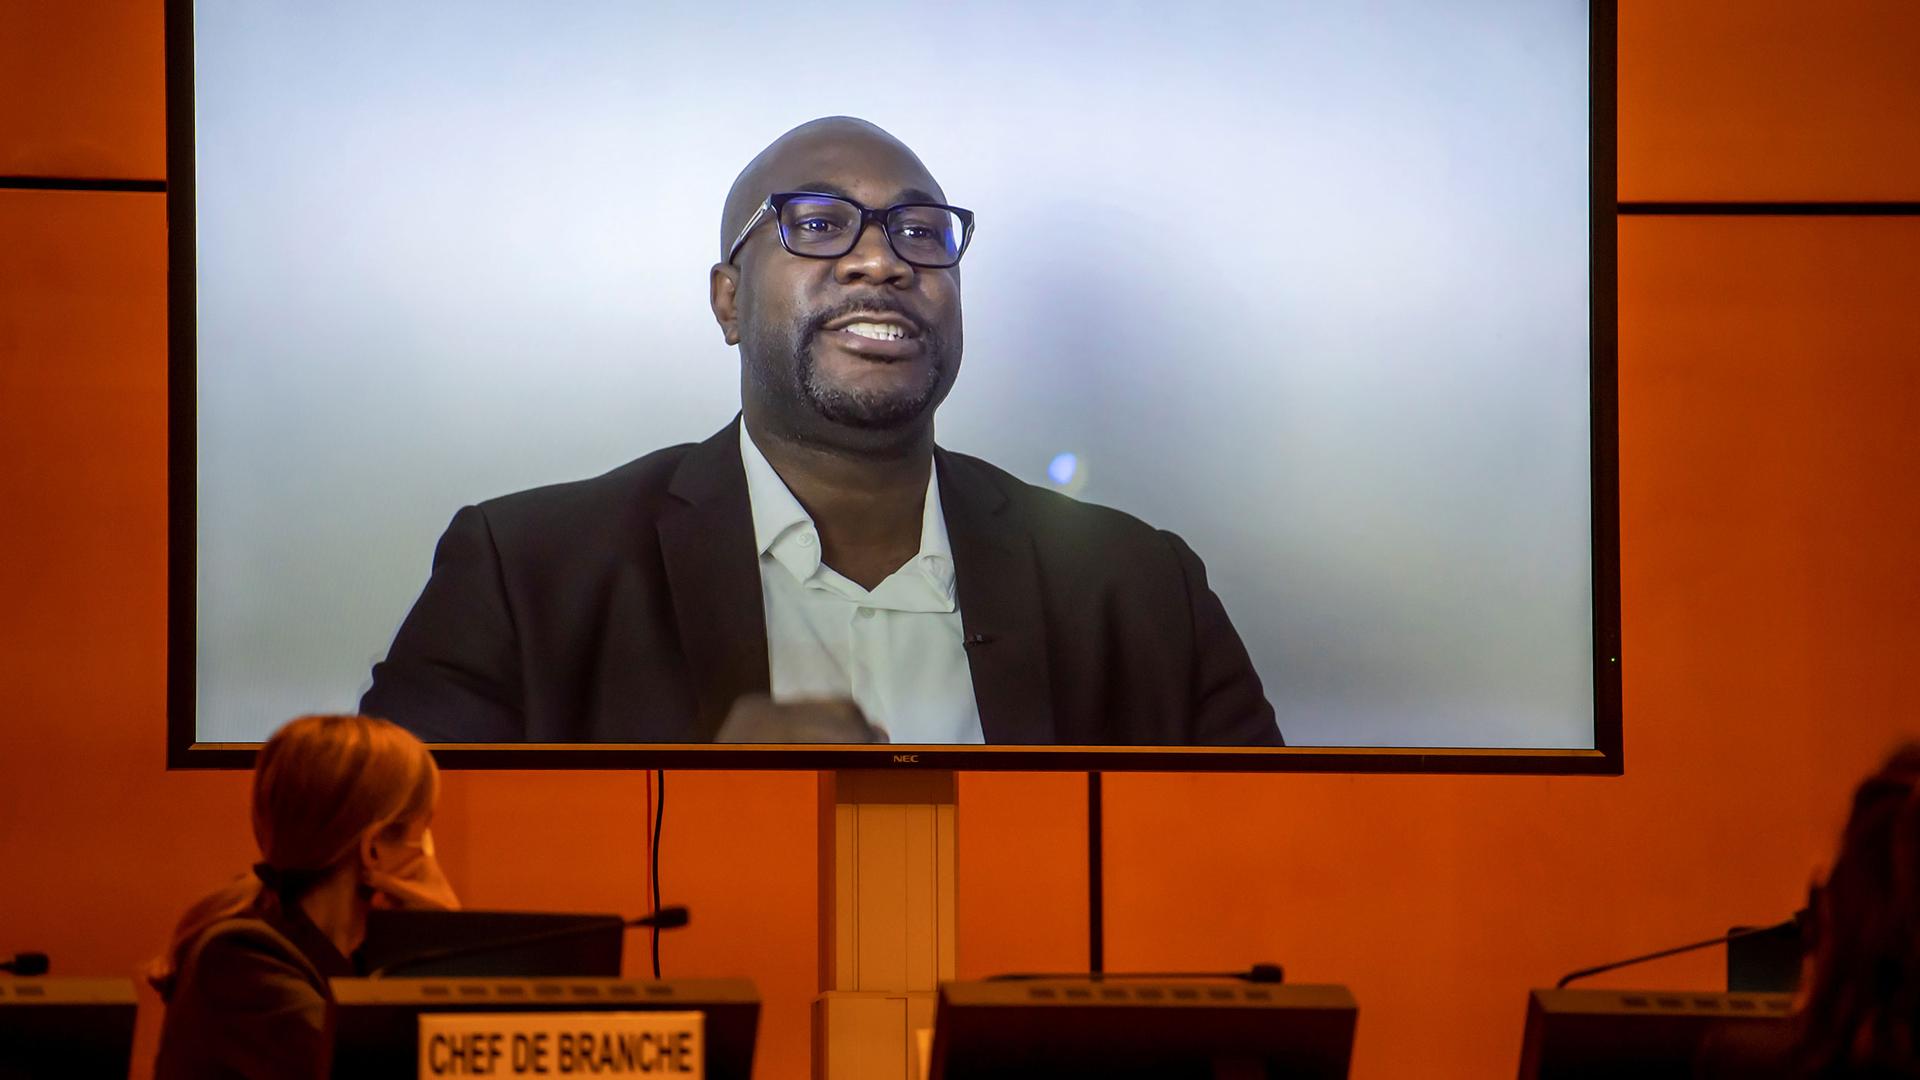 George Floyd's brother, Philonise Floyd, is shown wearing glasses and a blazer while speaking on screen via video message.